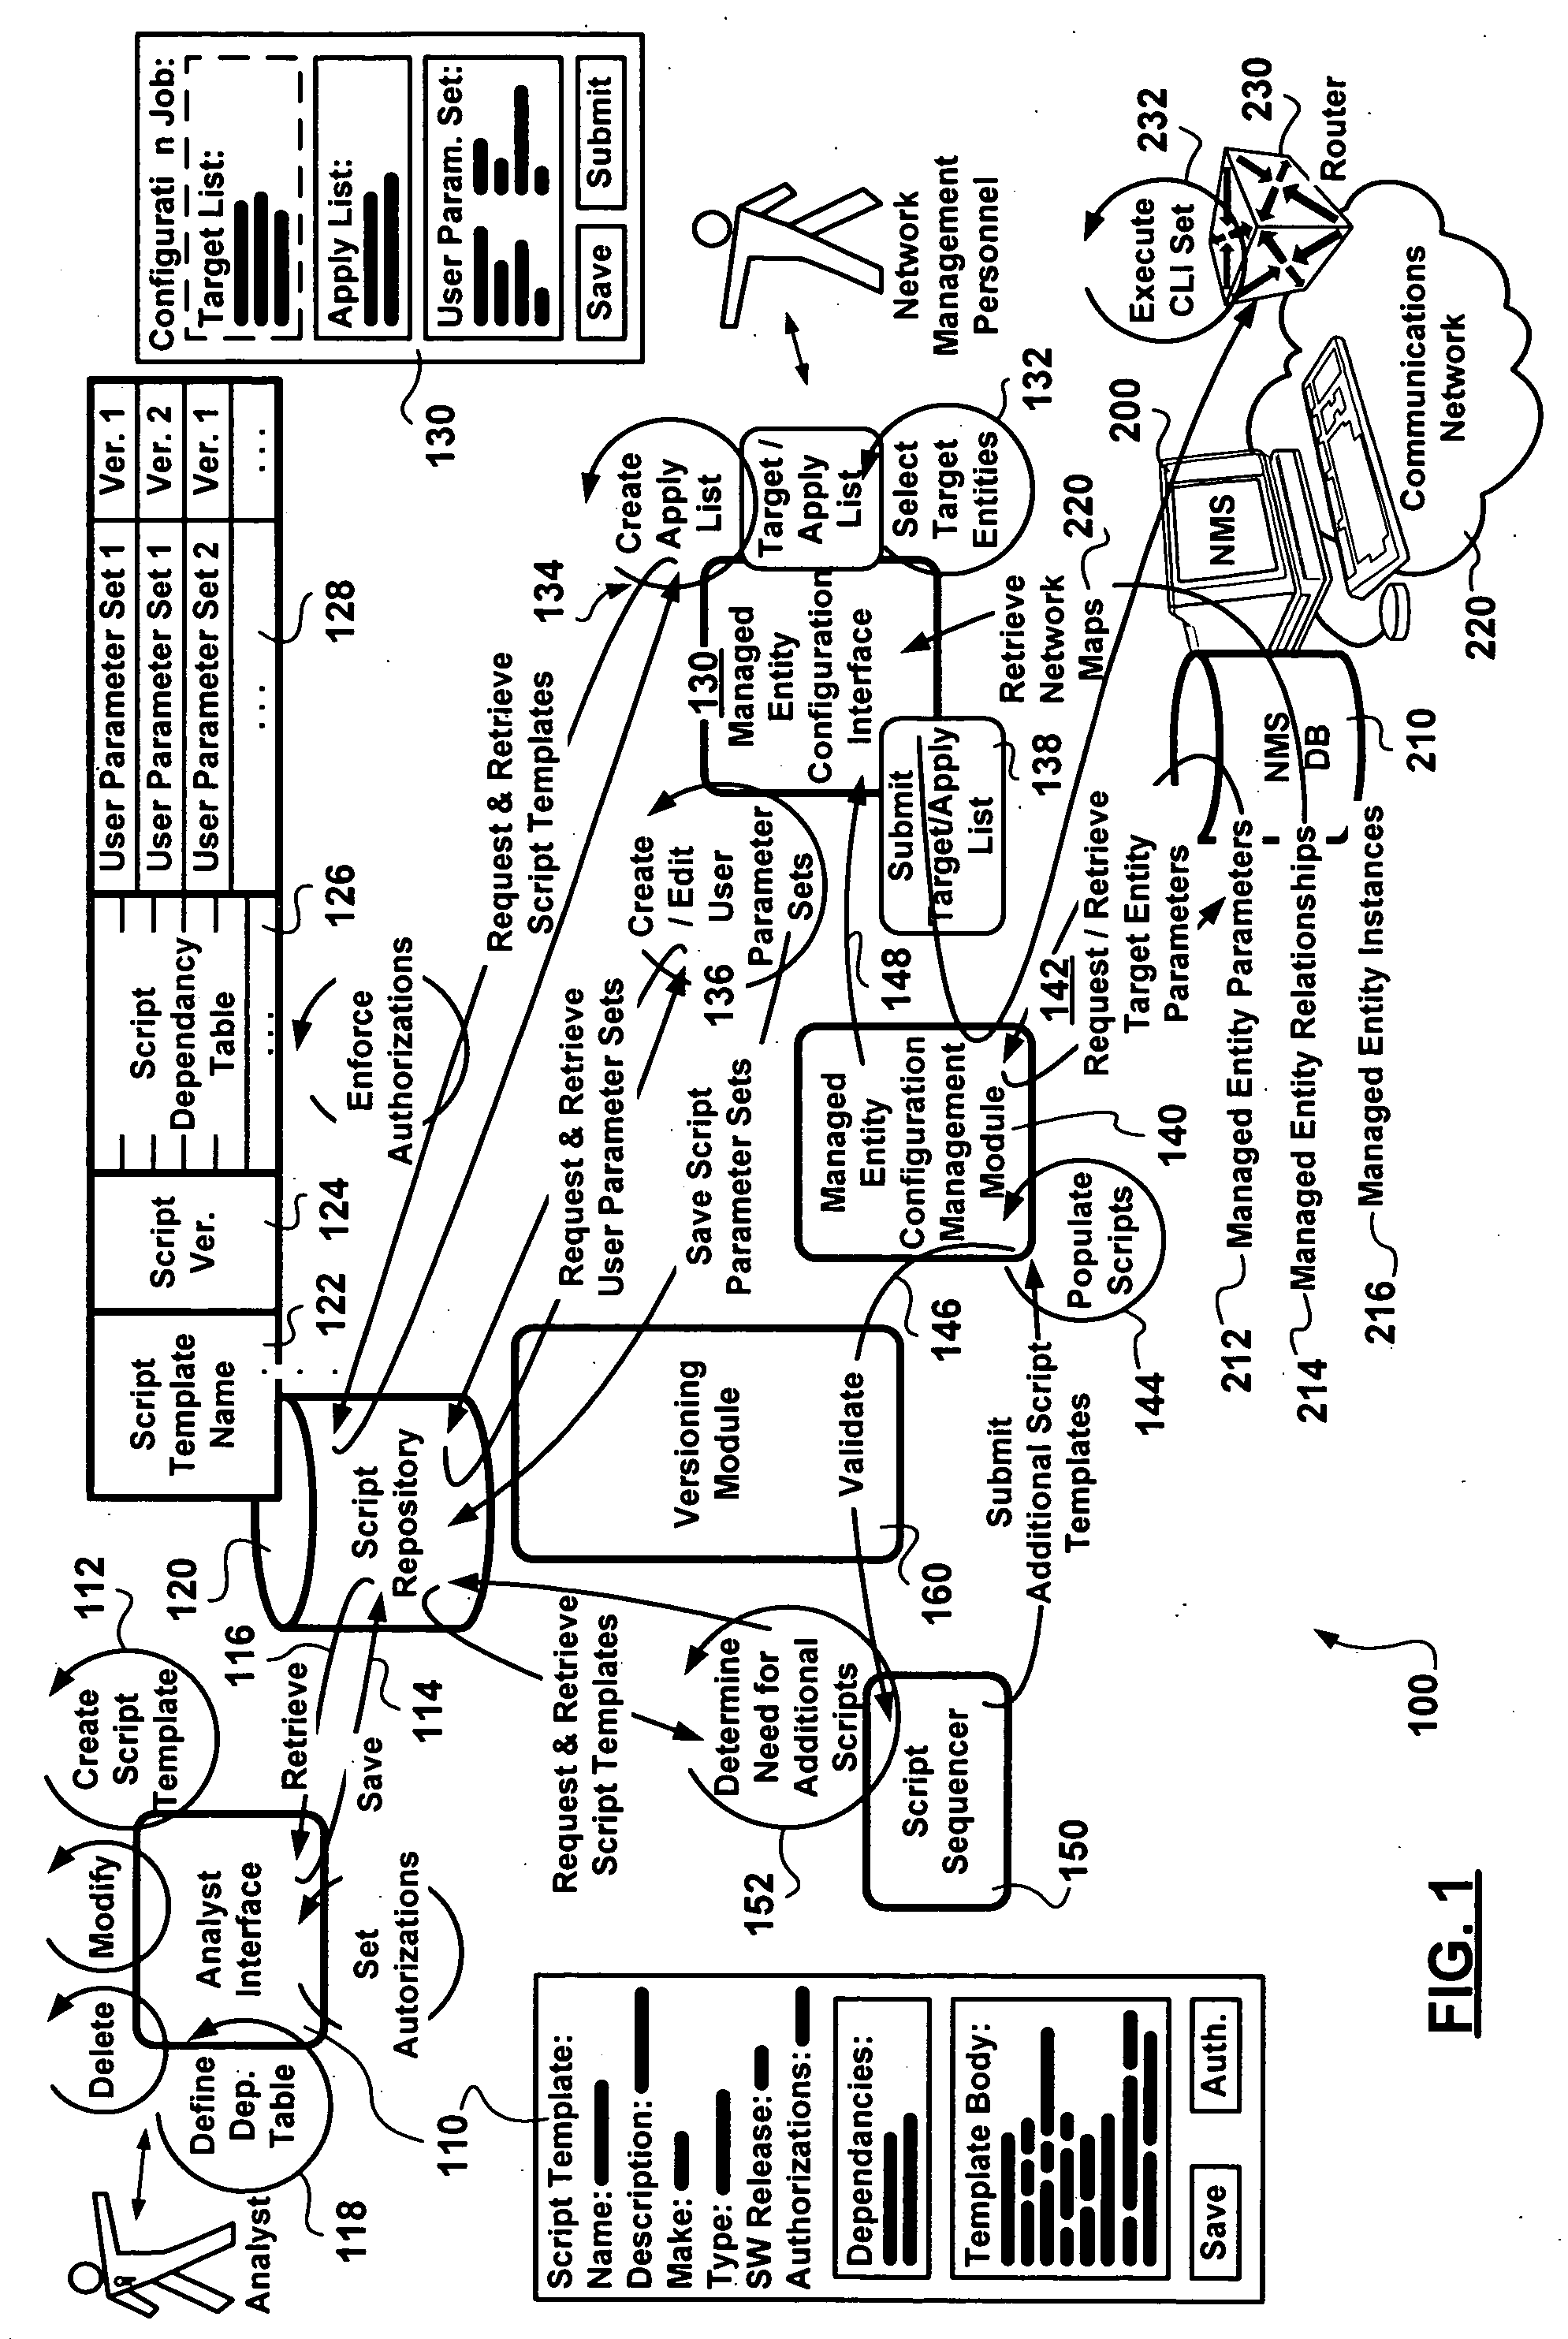 Method of configuring managed entities in a communications network using configuration templates